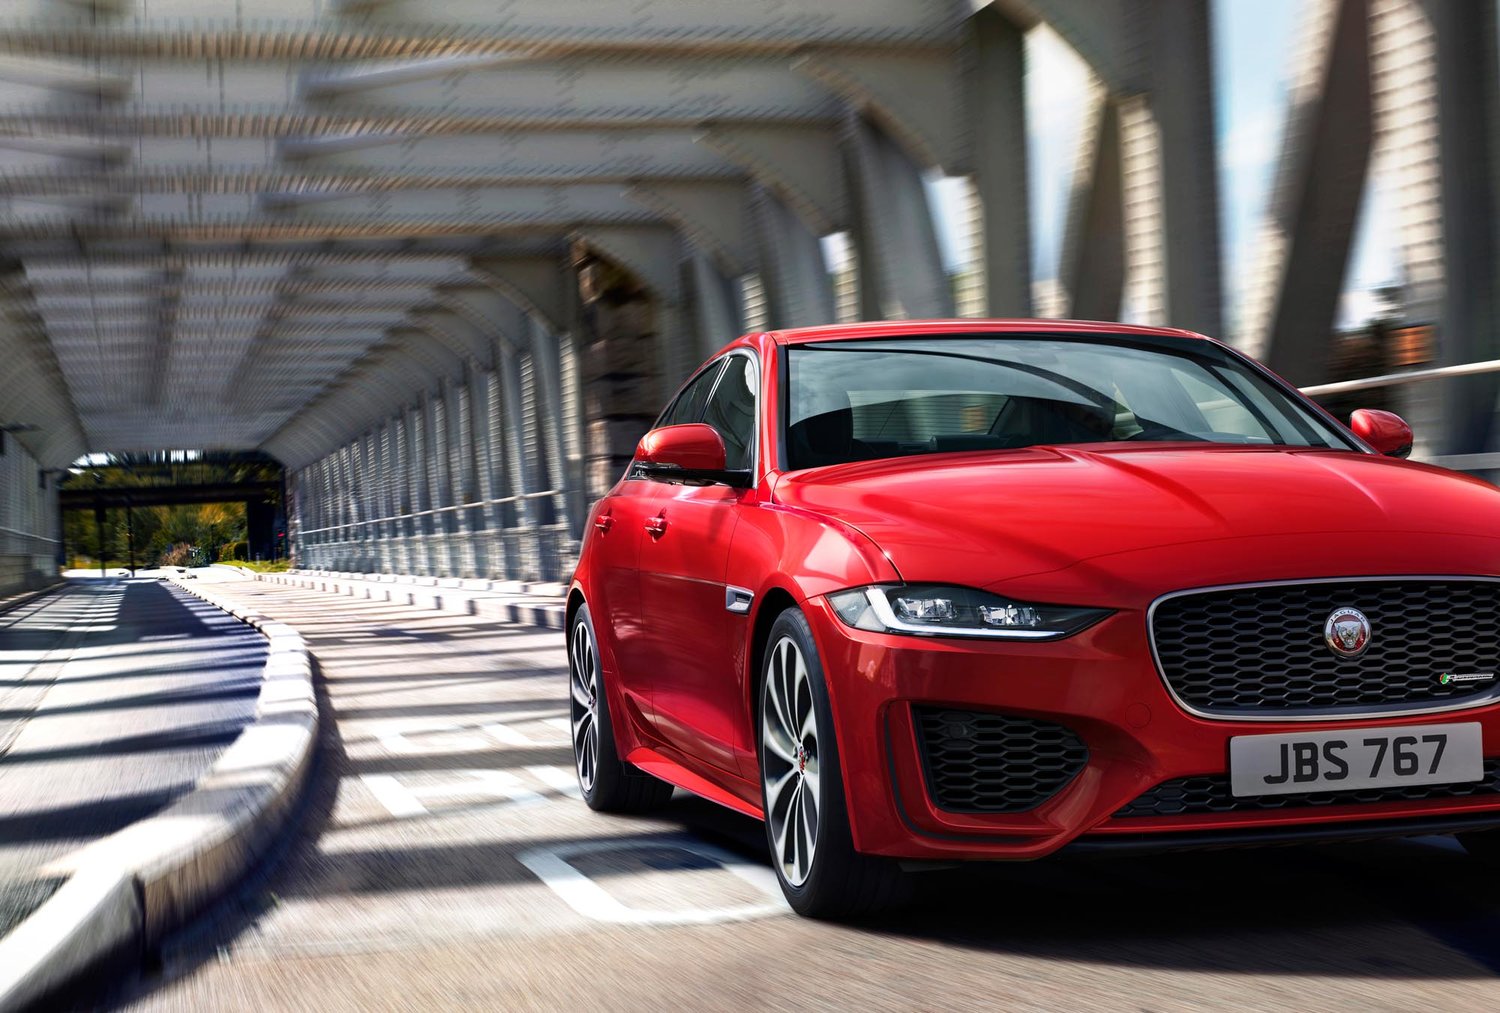 Jaguar Advertising Campaign - Photographic and Stills Production by Luke Jackson